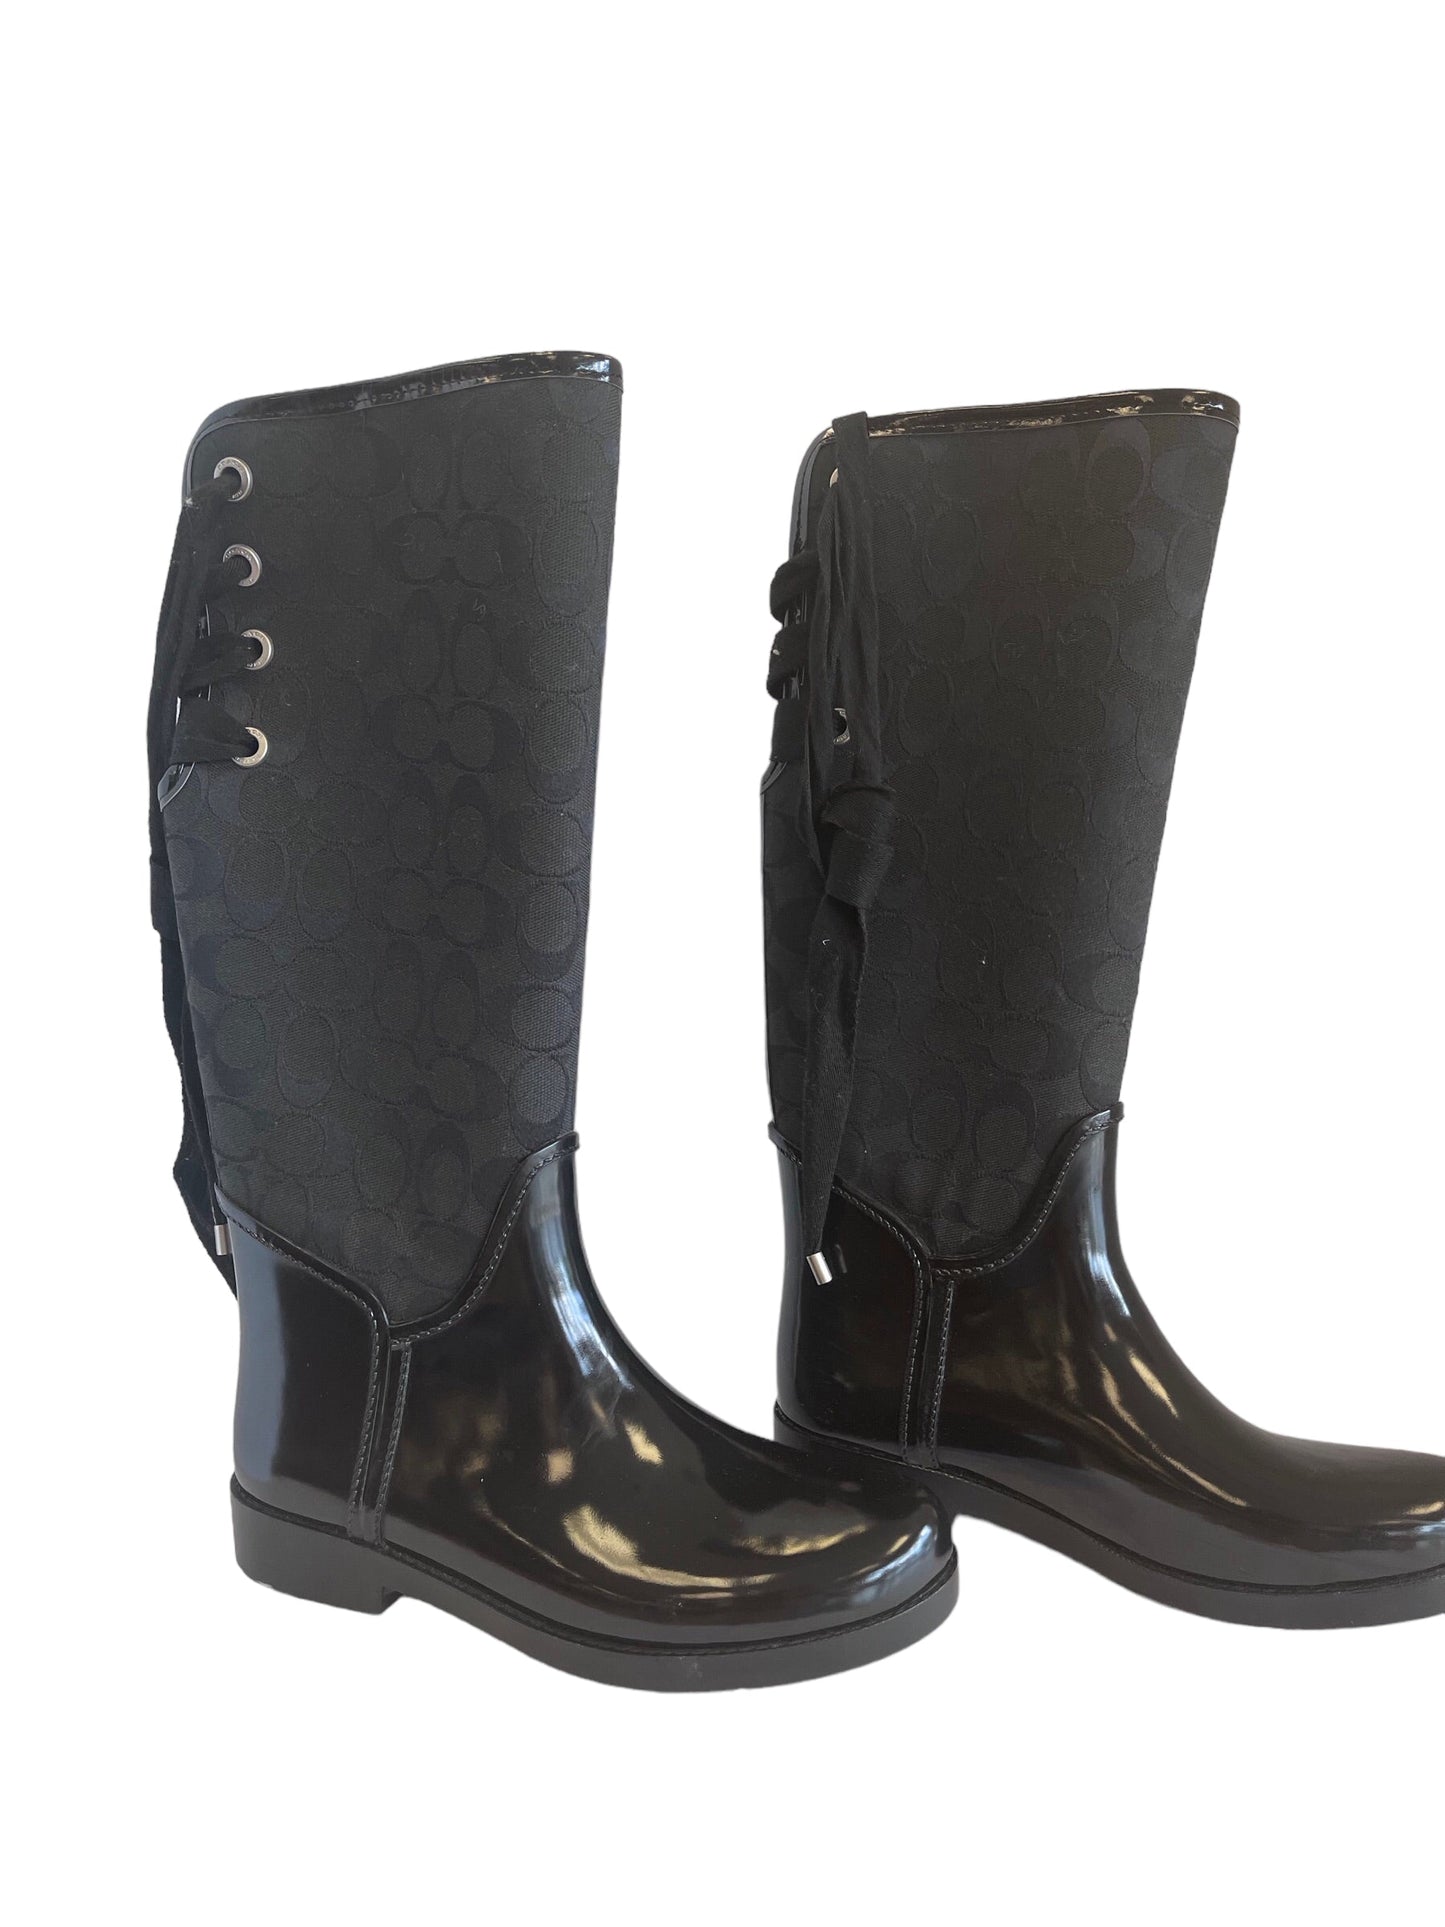 Boots Designer By Coach  Size: 8